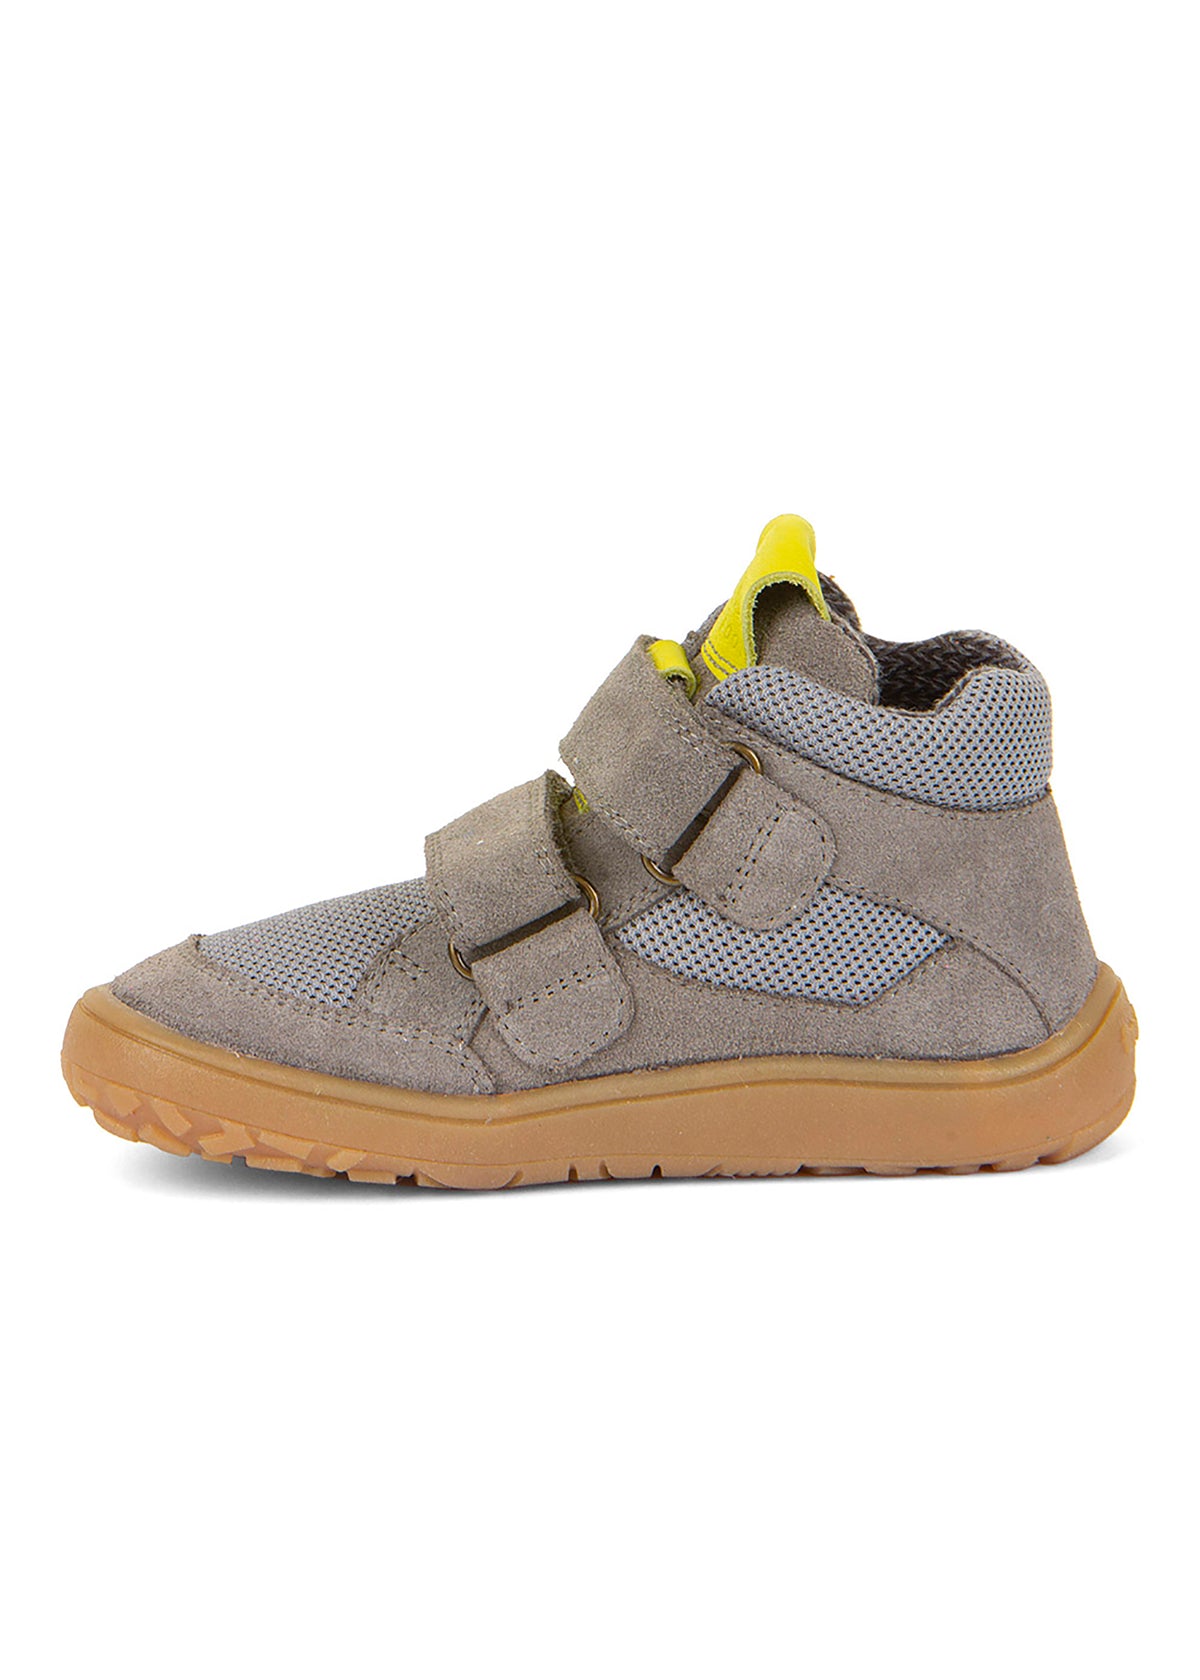 Barefoot sneakers with handles - mid-season shoes, Spring-TEX, gray